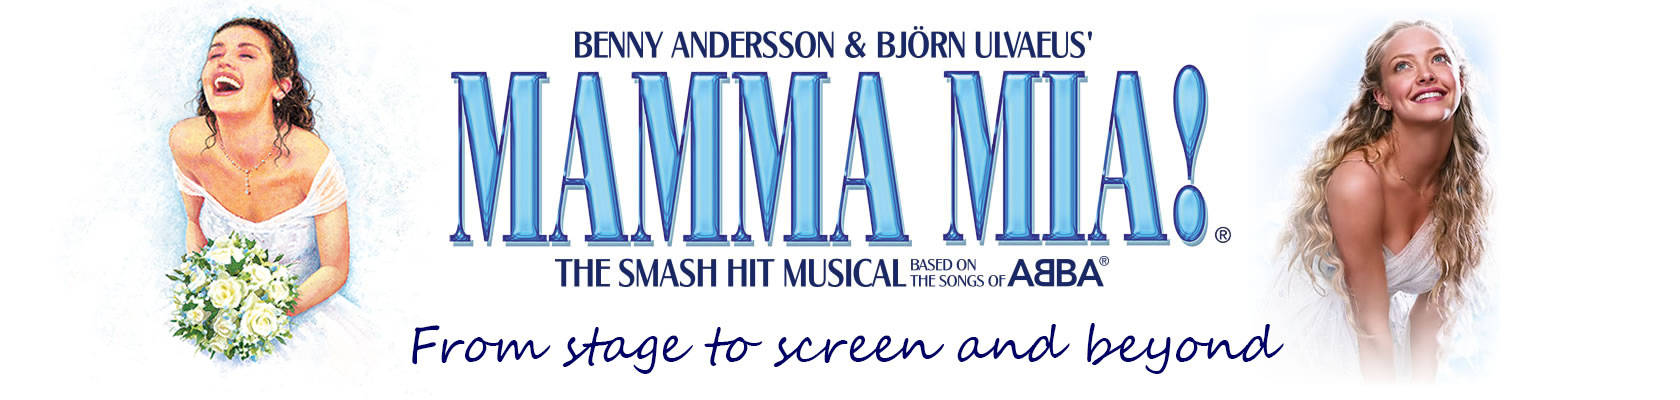 MAMMA MIA! Stage to Screen Title banner